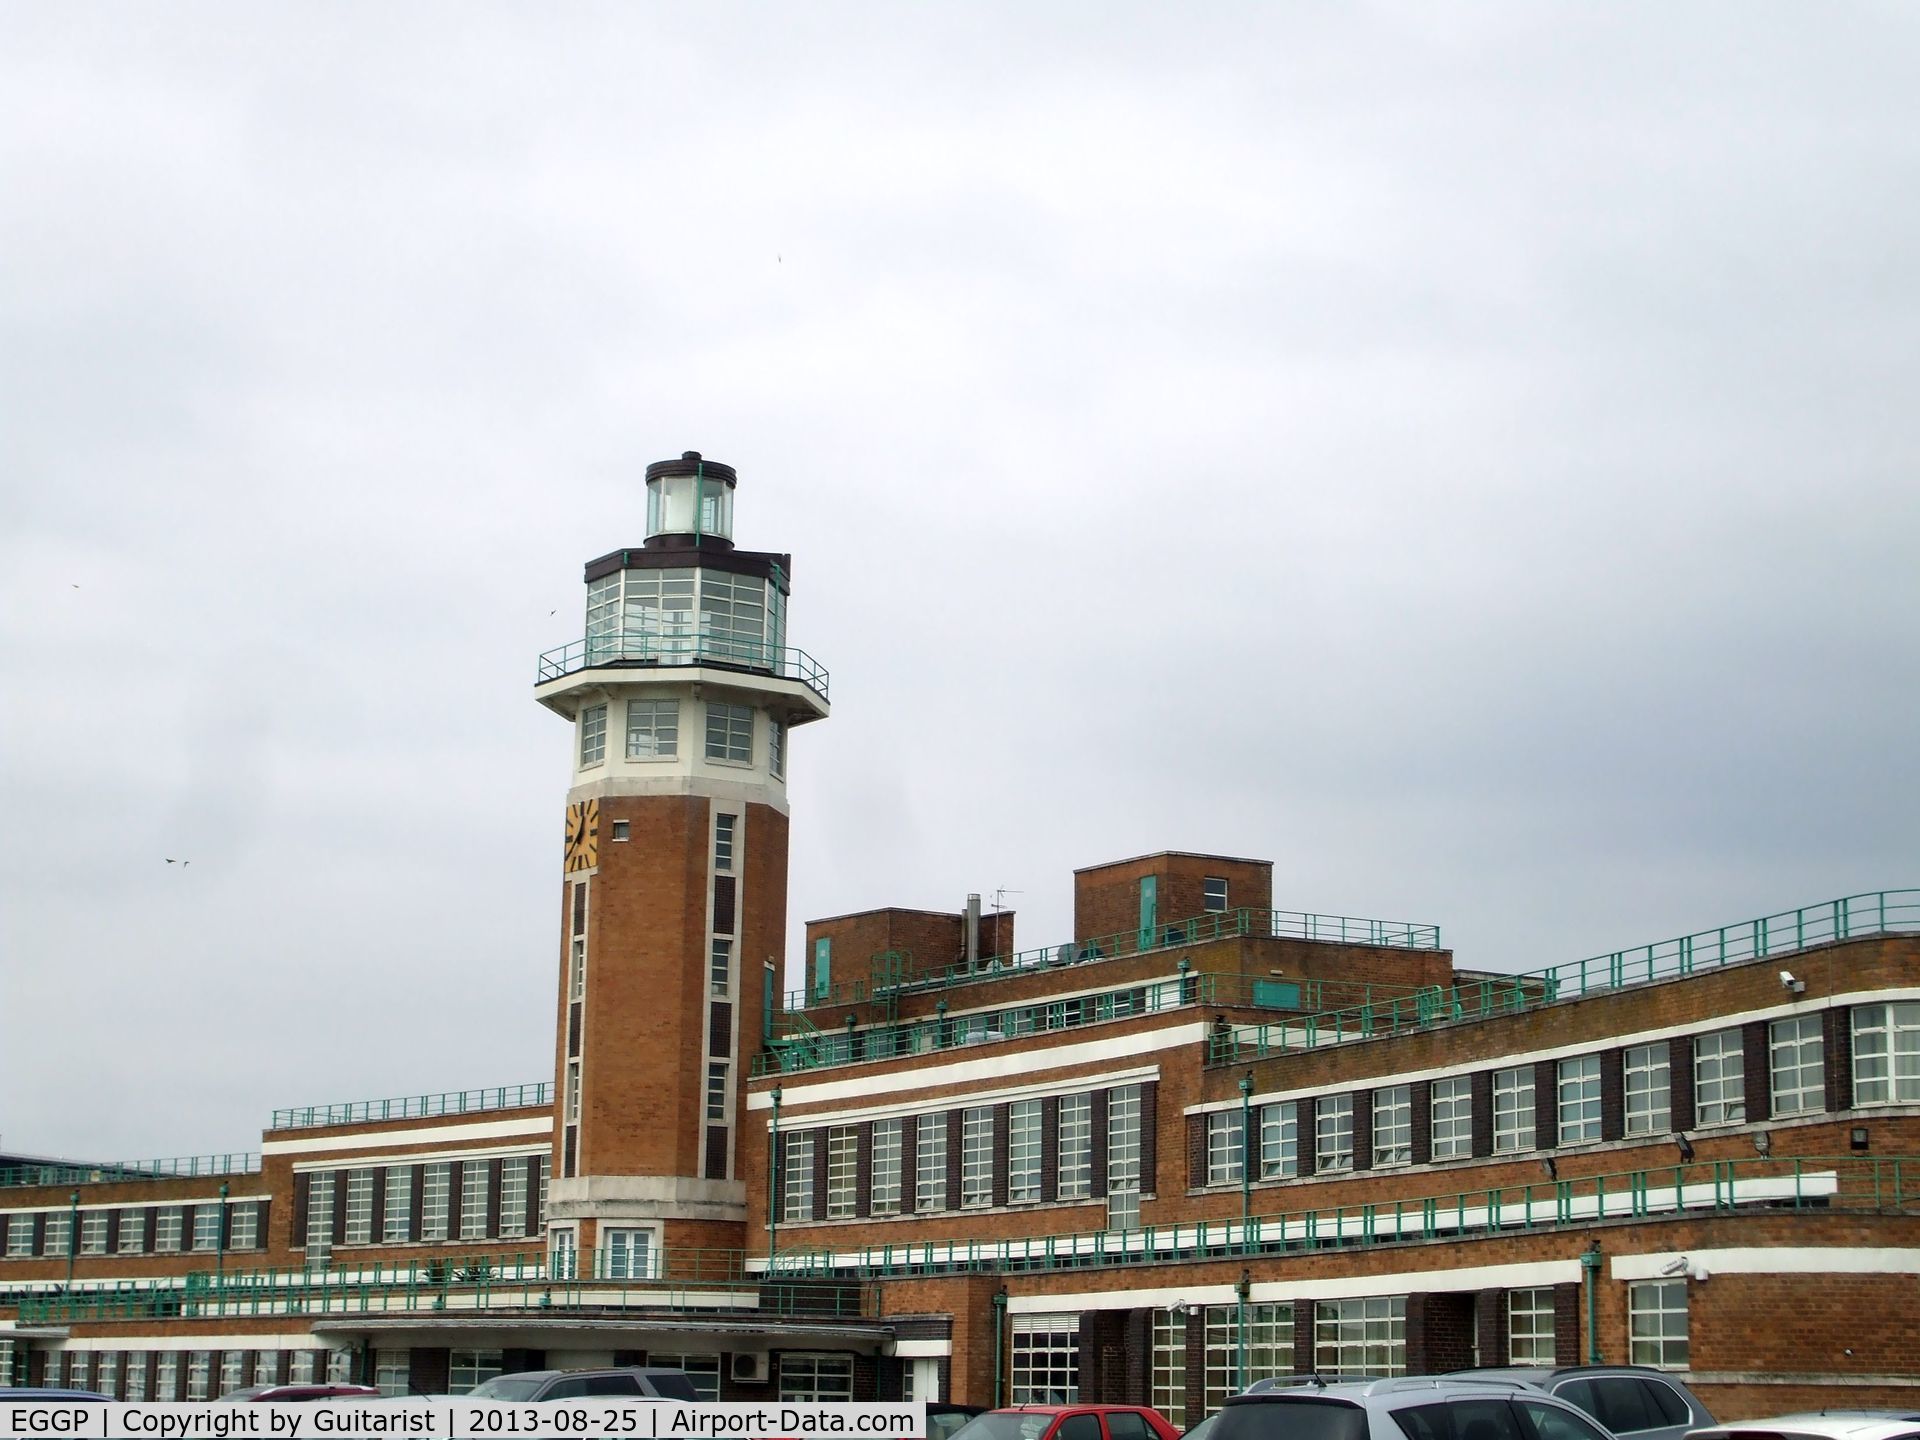 Liverpool John Lennon Airport, Liverpool, England United Kingdom (EGGP) - This is the old terminal building and tower at Liverpool Speke Airport